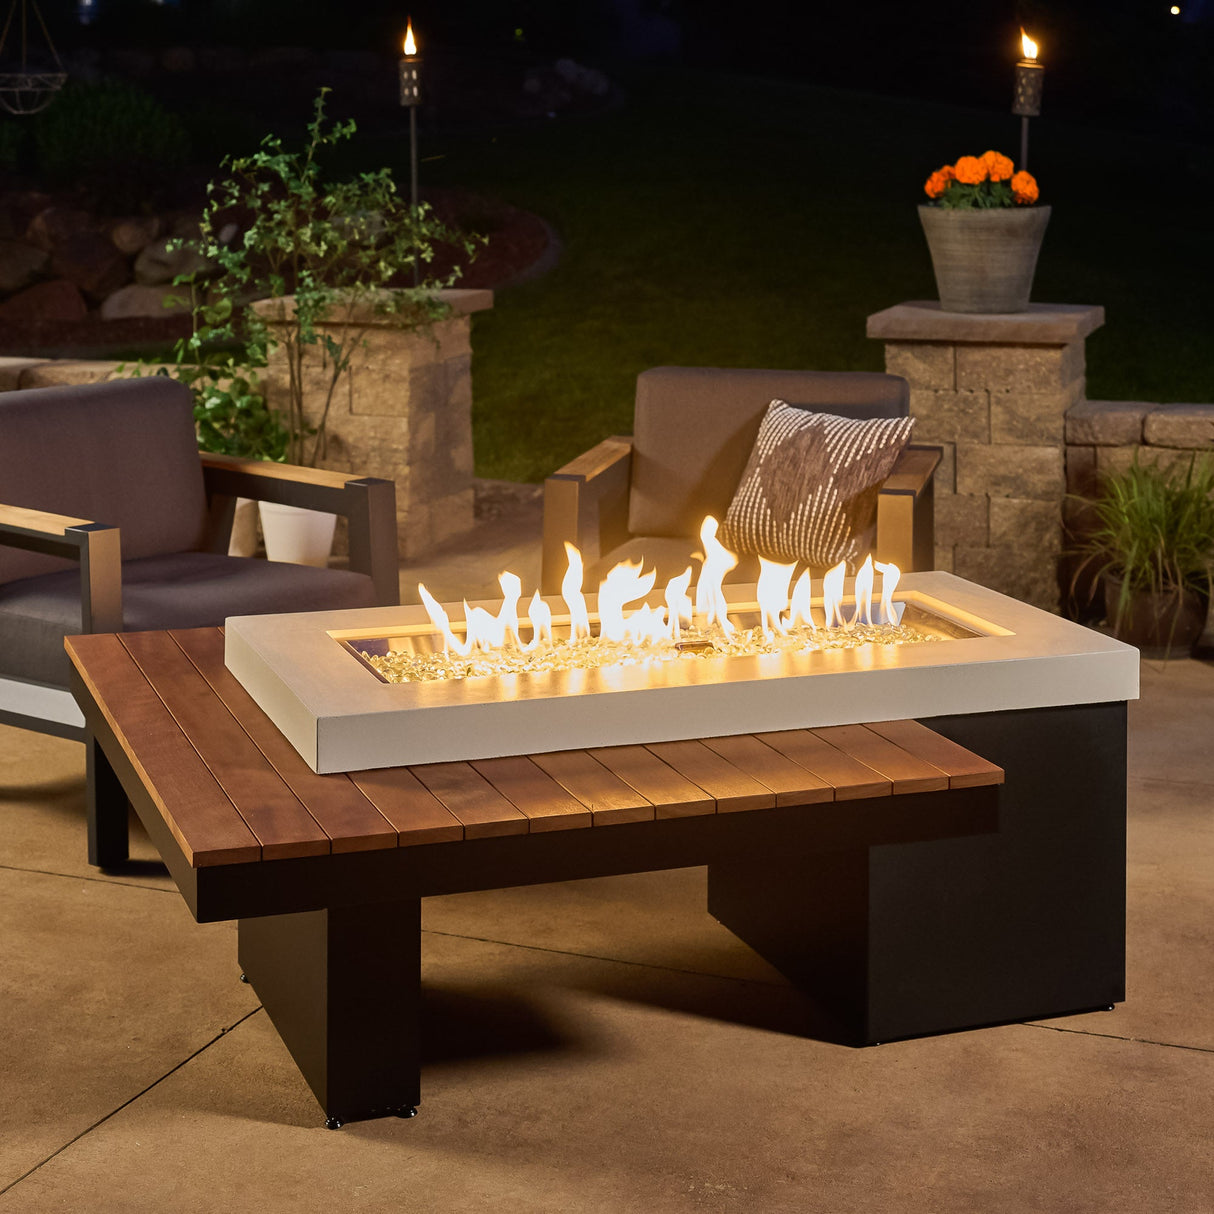 The Uptown Iroko Linear Gas Fire Pit Table on a patio with a large flame on a dark night